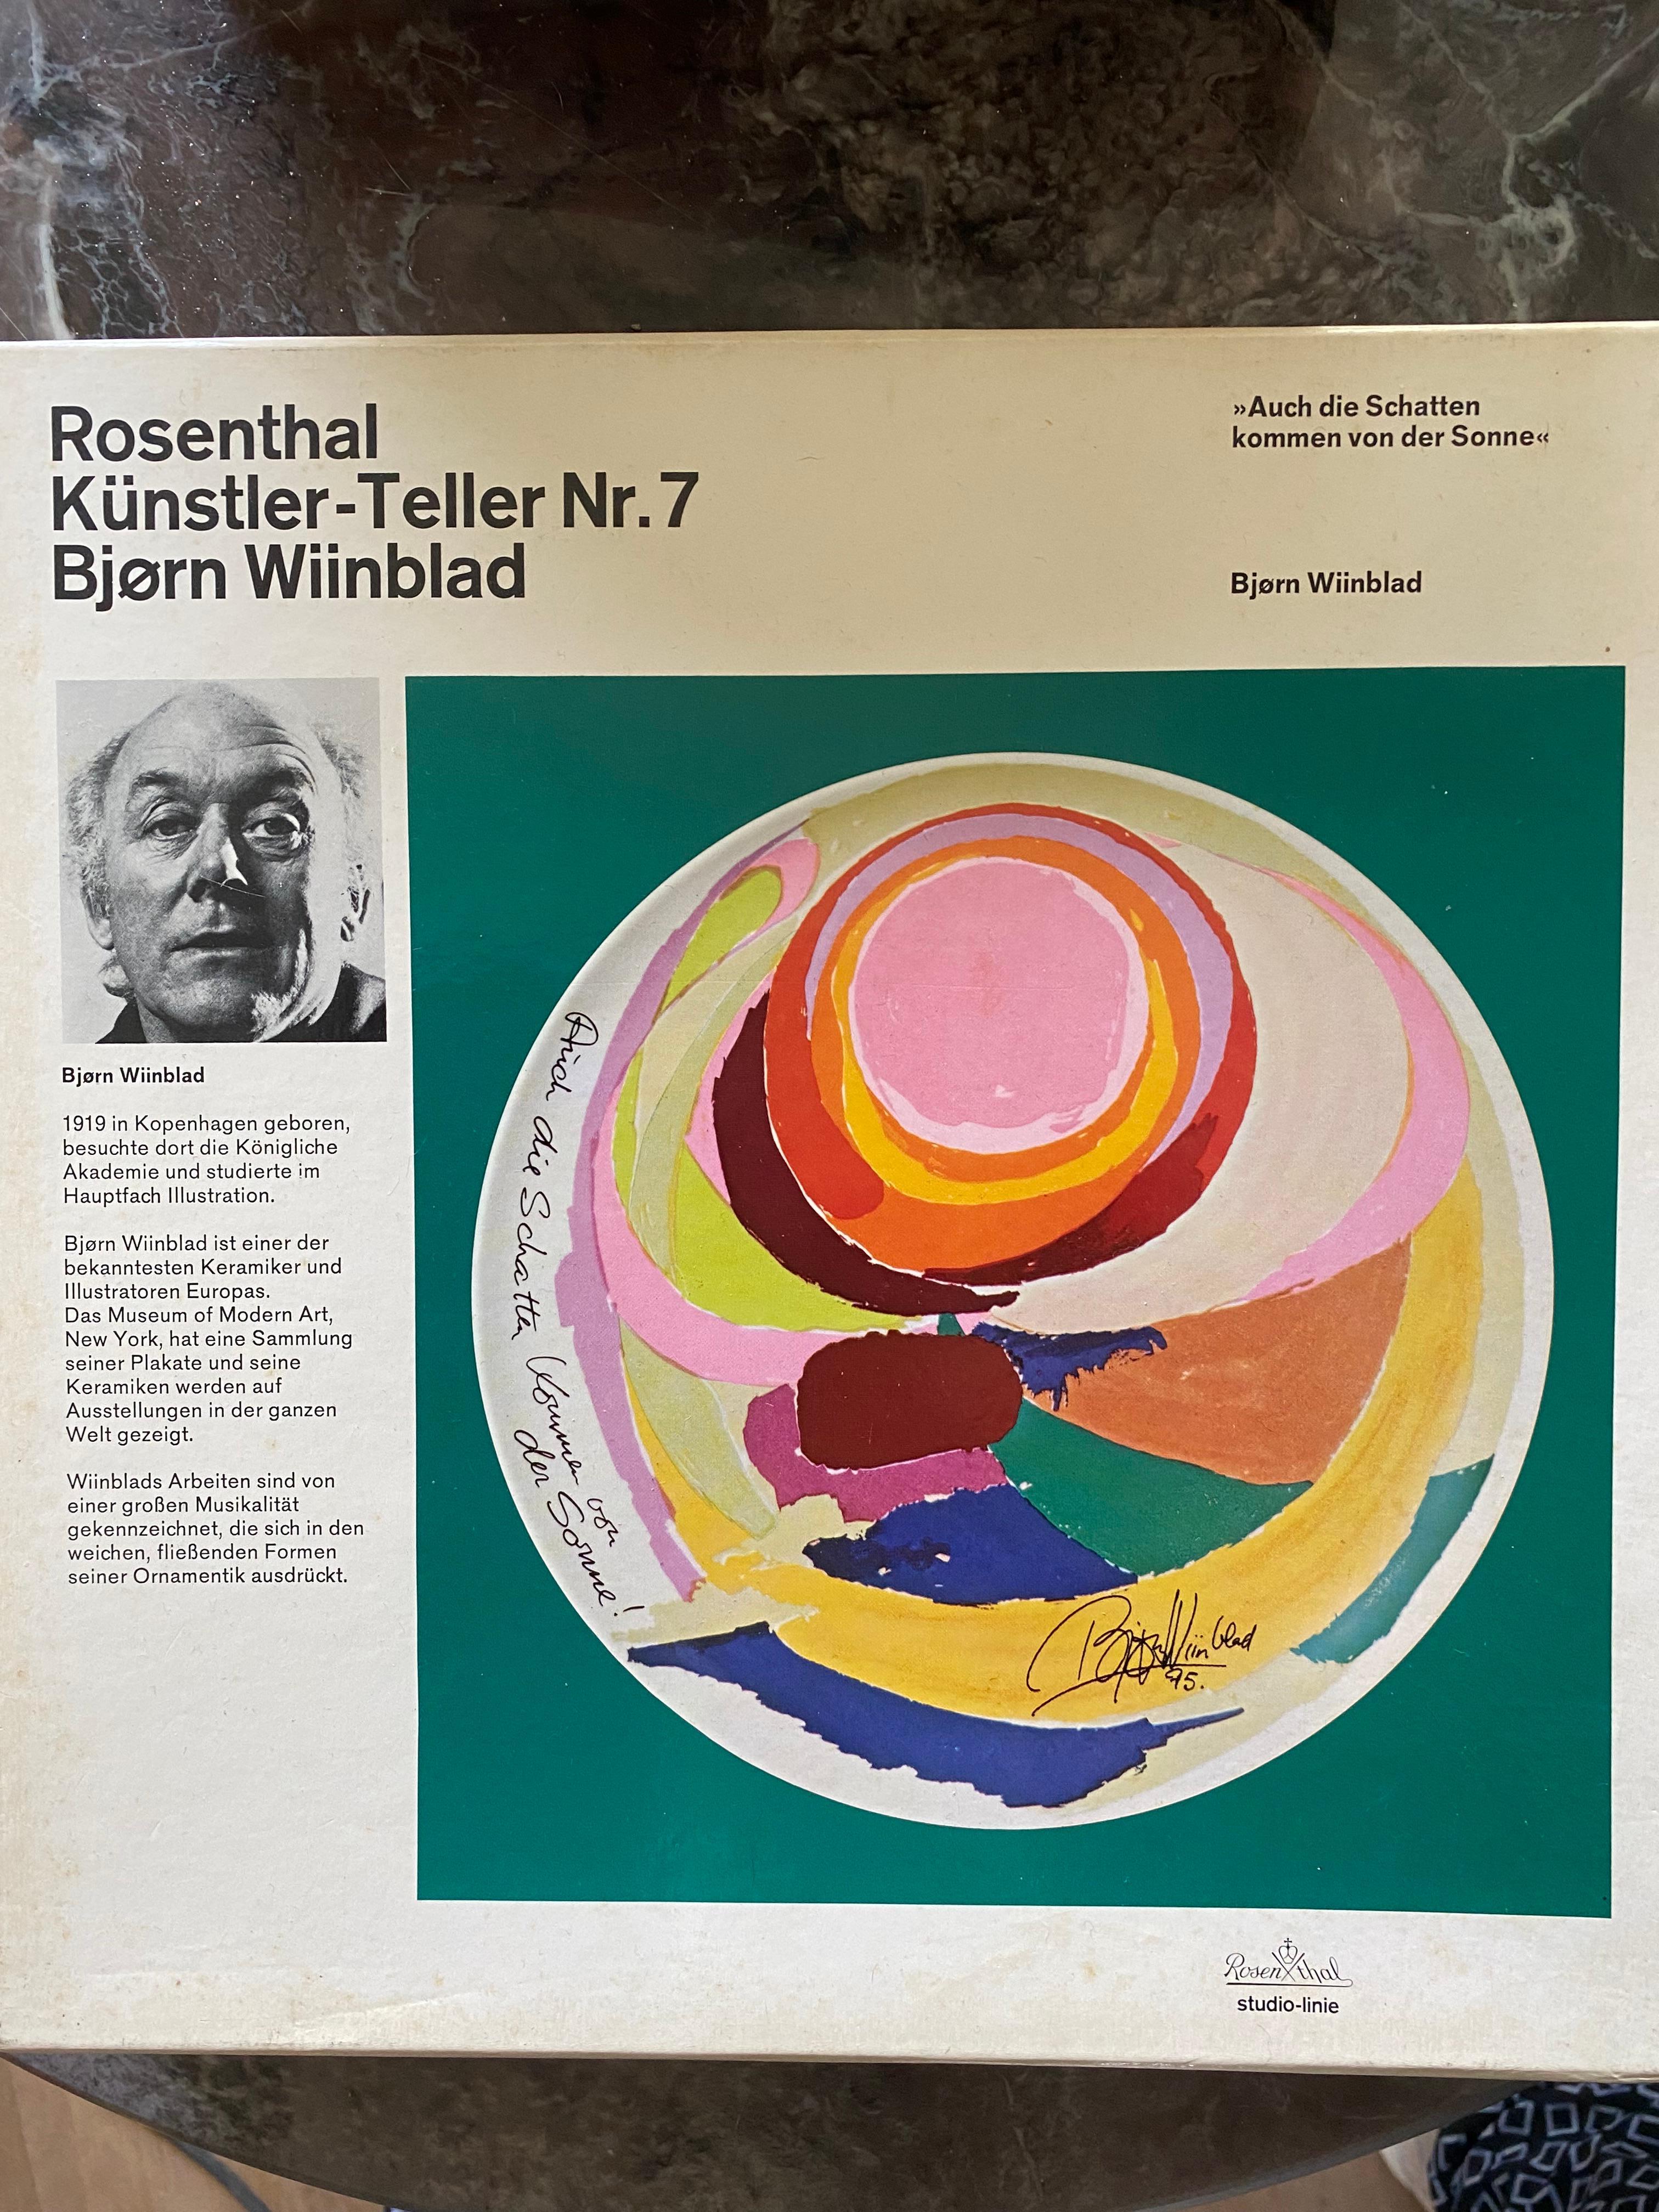 Stunning wall plaque by Bjorn
Wiinblad for Rosenthal. The  plaque was produced in 1975 in an edition of 5000, and this one is number 1328. 

The text on the plate is German ‘auch die Schatten kommen von der Sonne’ which can be translated as ‘also